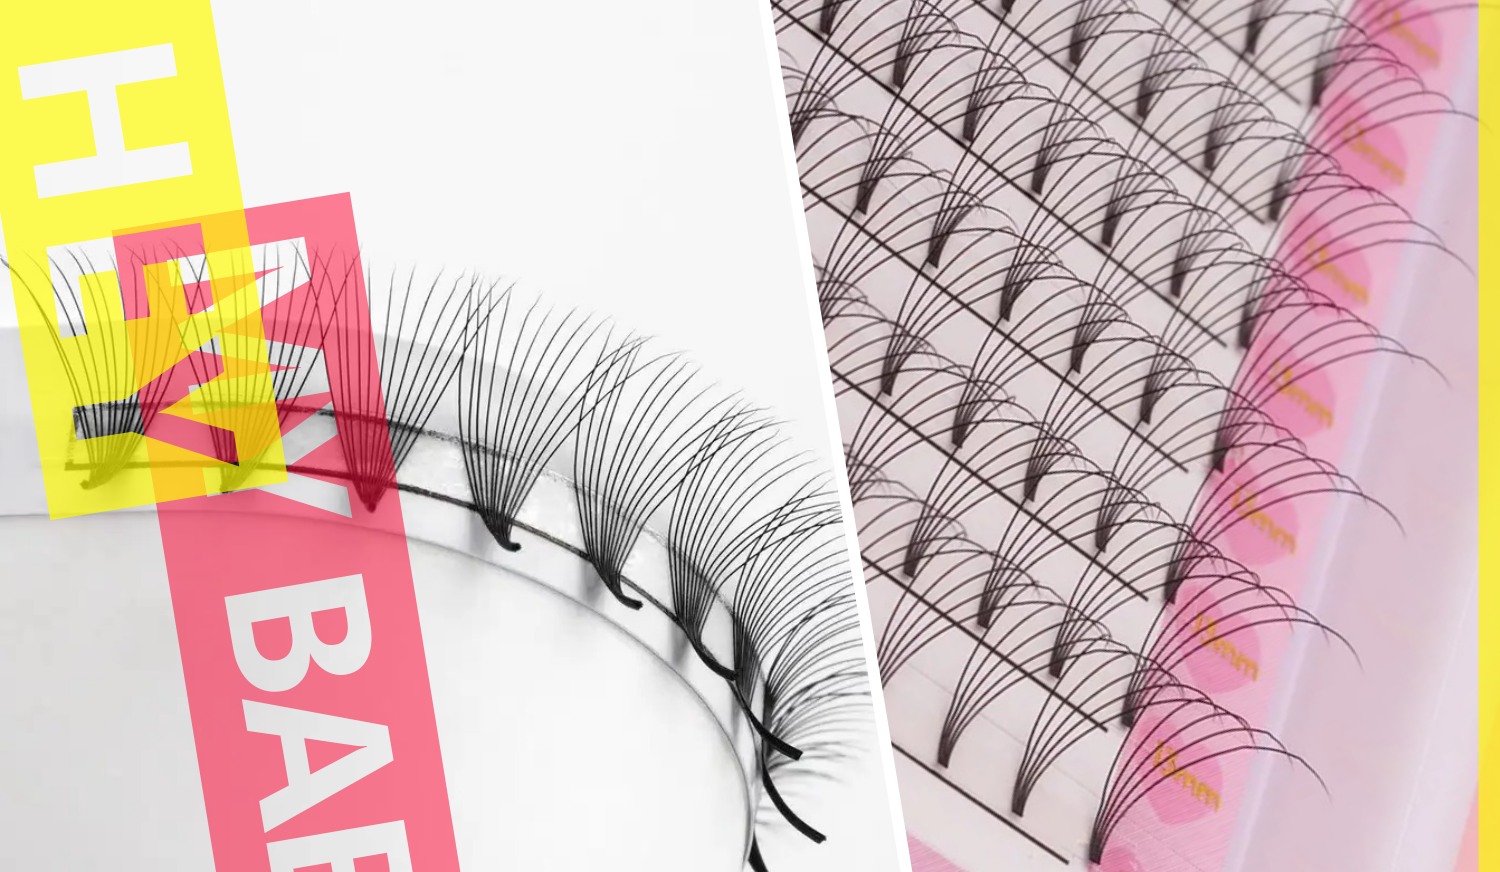 Sparkling Eyelash®: The Home for Quality Premade Russian Volume Fans